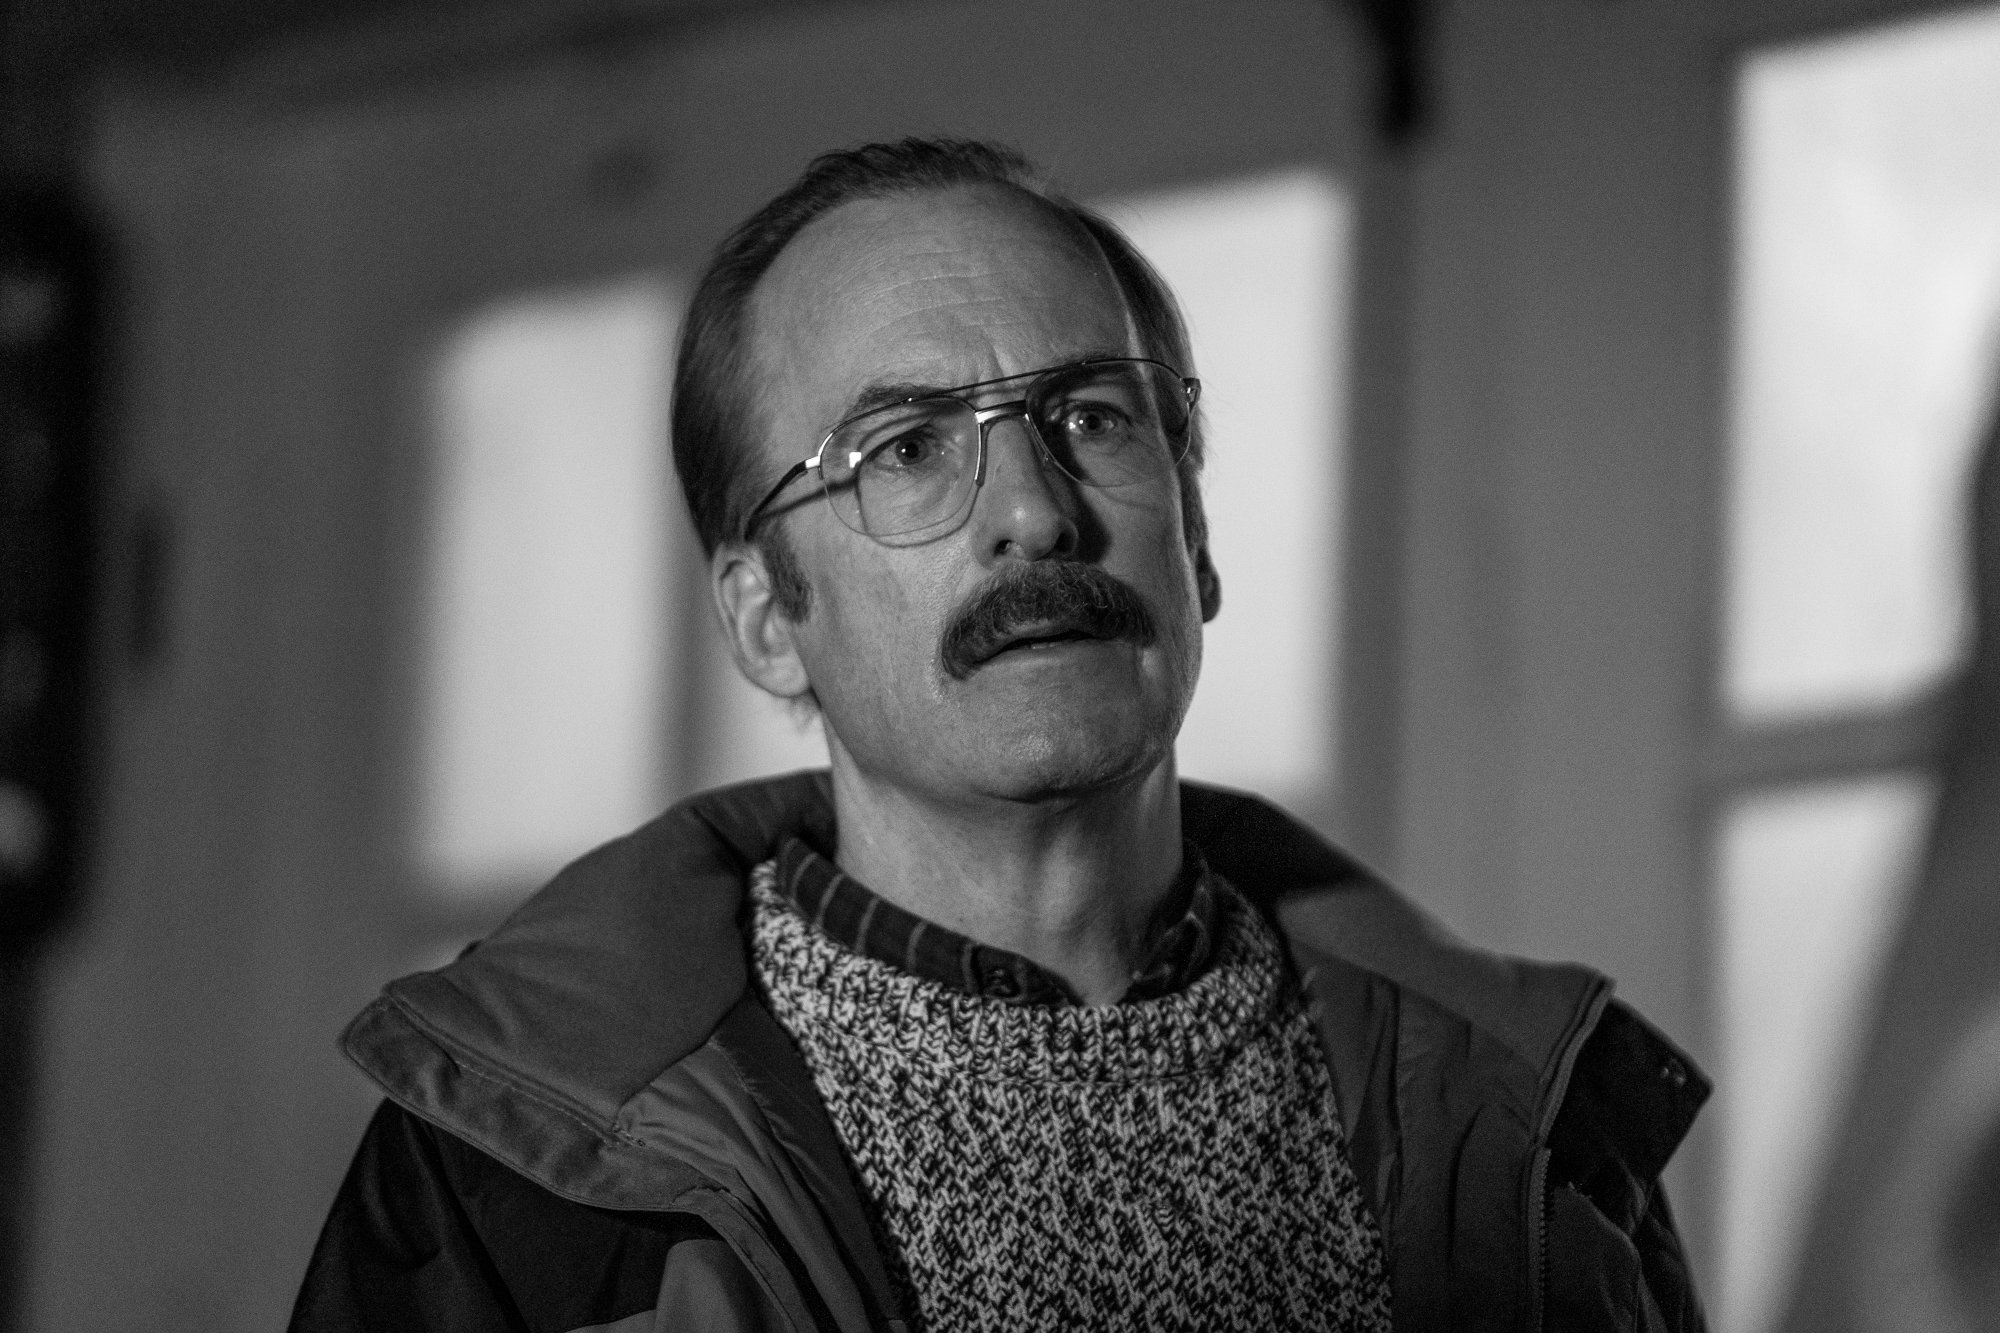 Bob Odenkirk as Gene Takovic in 'Better Call Saul' Season 6 Episode 11 for our article about the episode 12 teaser. The image is in black and white, and Gene is wearing a sweater, jacket, and glasses.